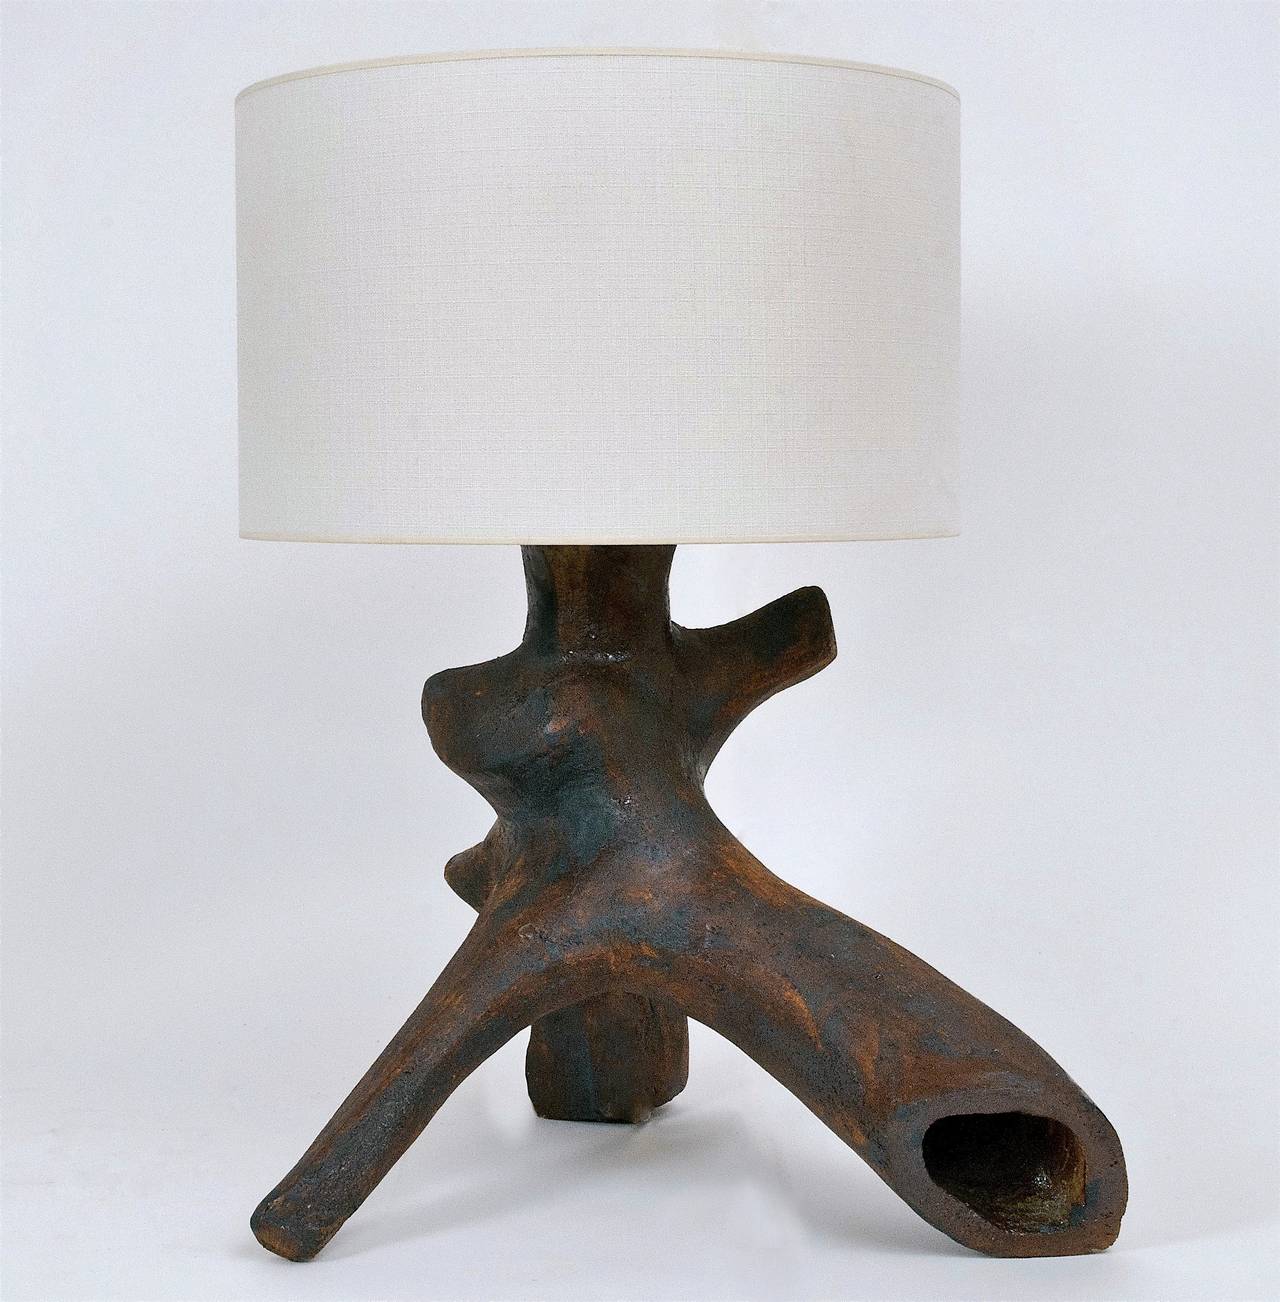 Impressive floor lamp-base (or extra large table lamp) in grogged clay with warm and patinated glaze and slip, forming a tree trunk sculpture.

* Dimensions approx. are without the lamp-shade
Very heavy piece. 

Note : This piece displayed has